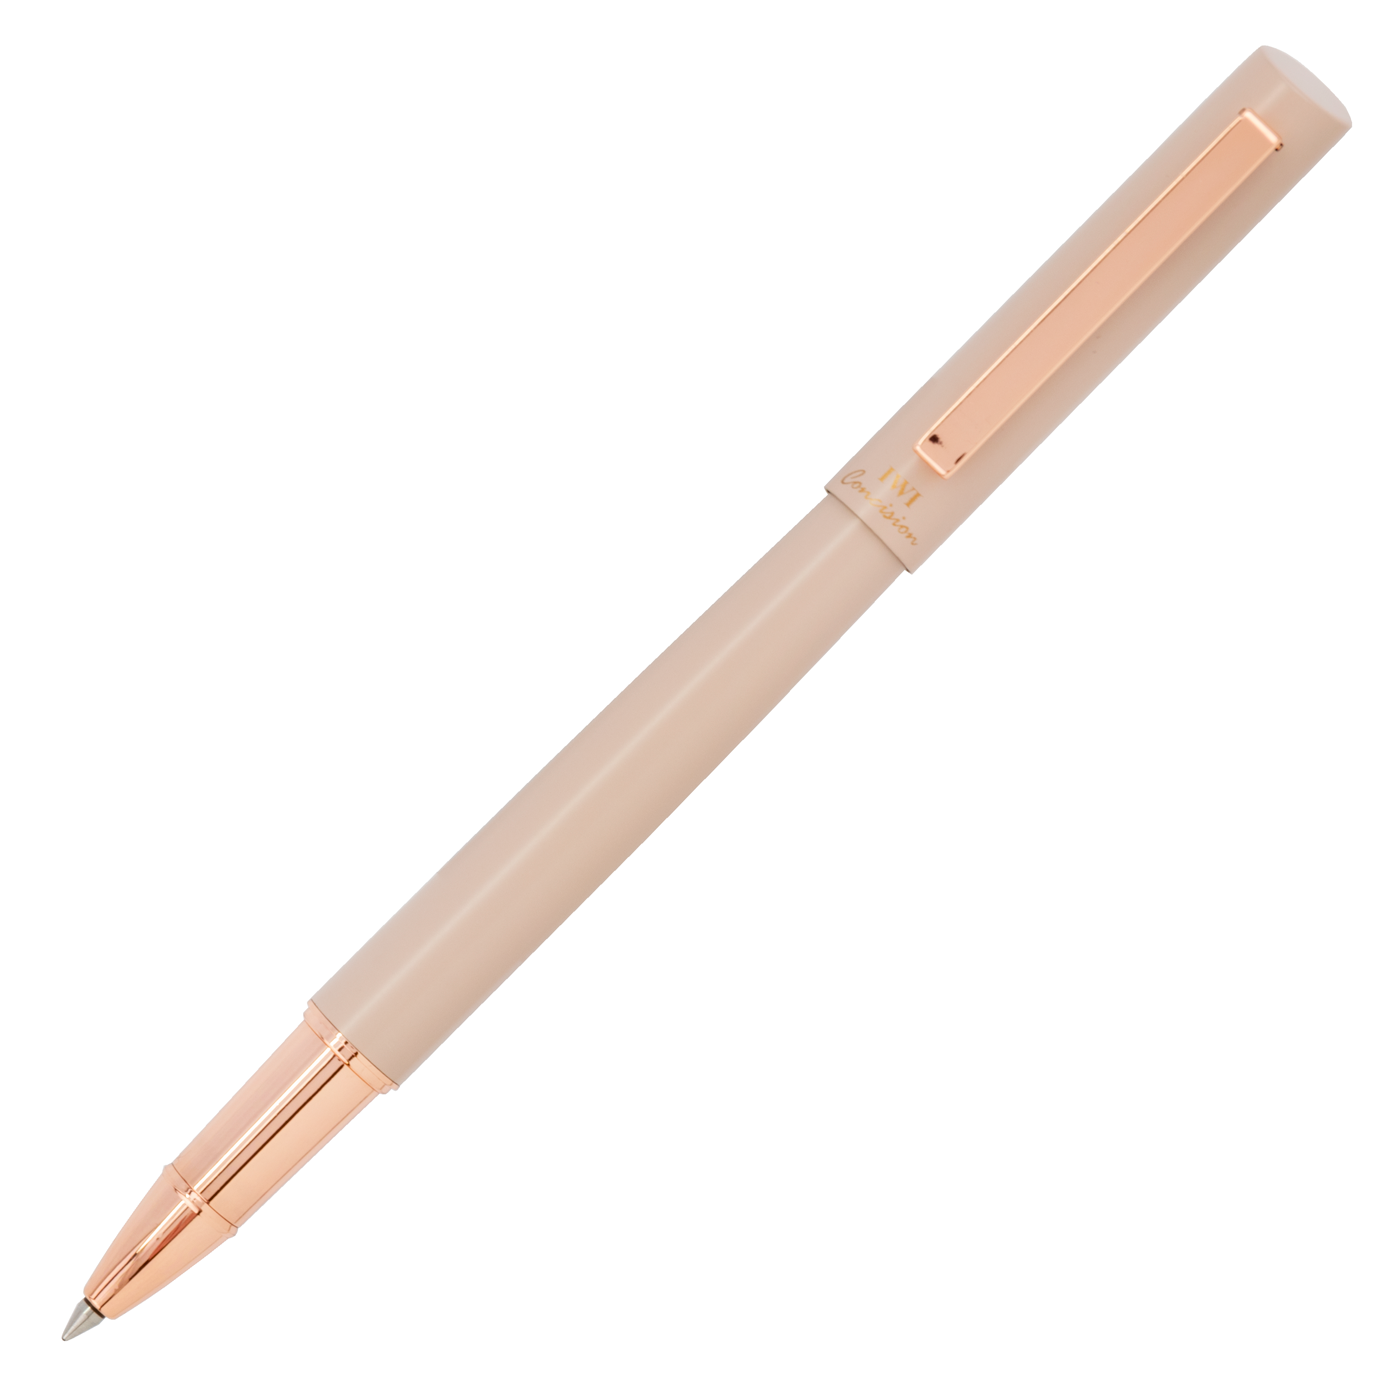 IWI Concision Rollerball - Soft Pink